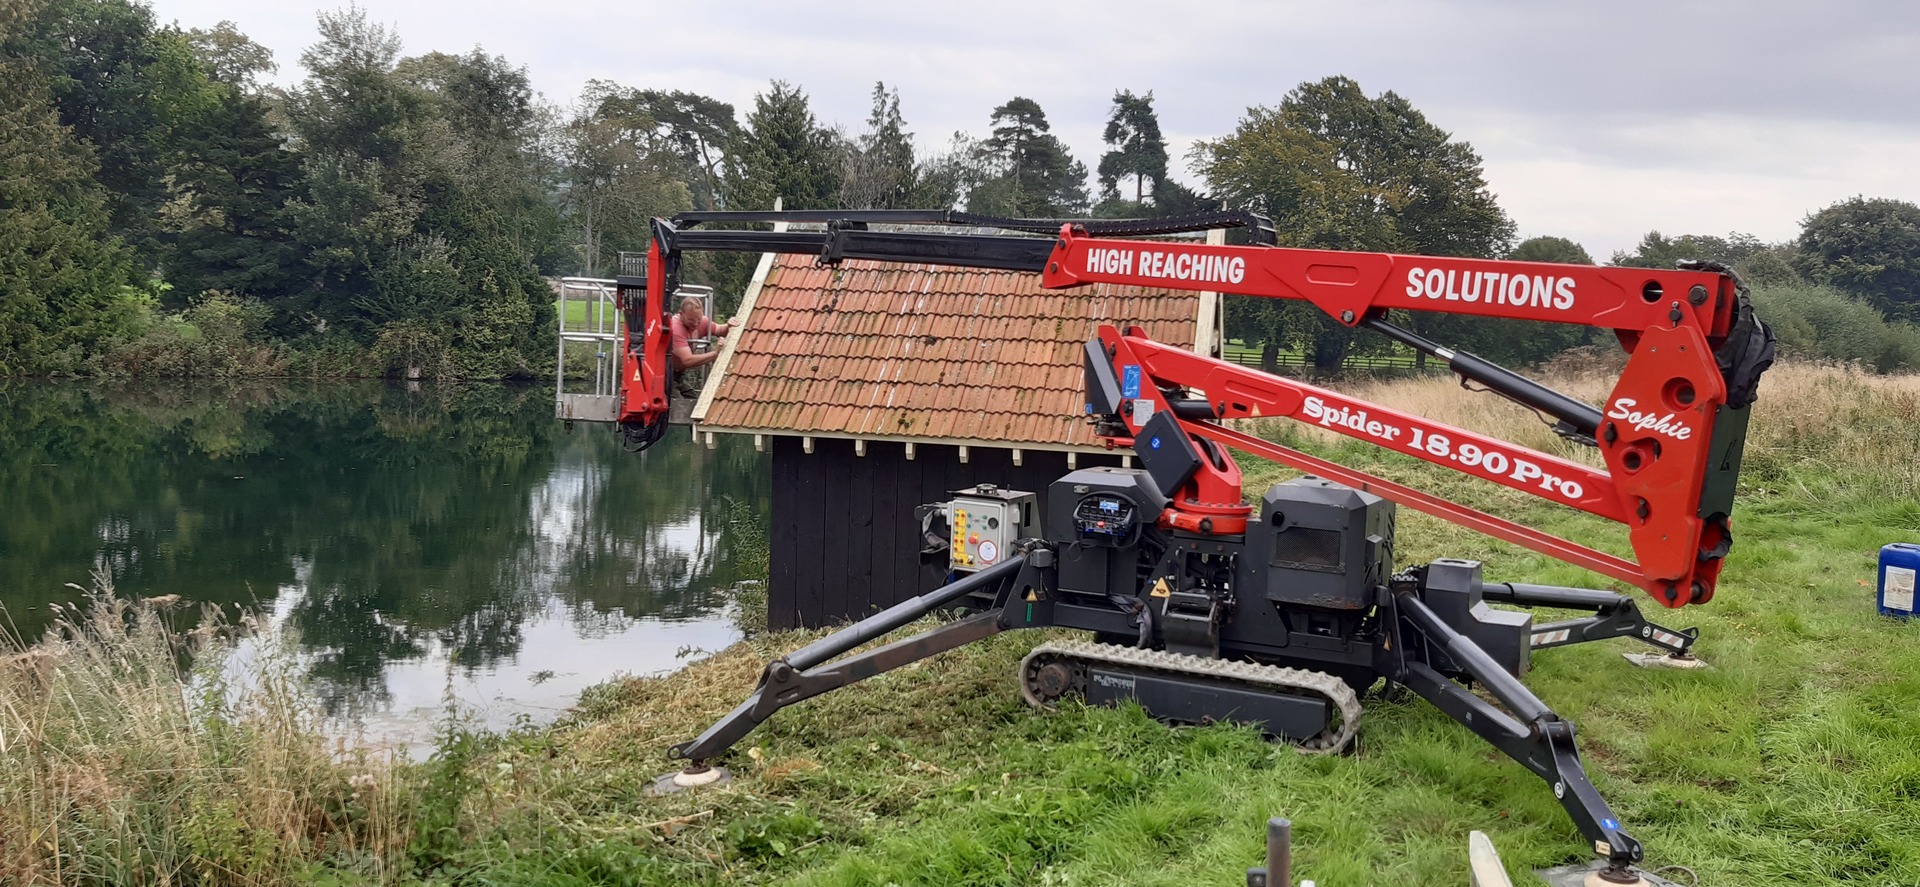 Another view of Sophie, High Reaching Solutions 18m tracked spiderlift cherrypicker, booming out over a lake assisting a decorator with building maintenance of a Boat House near Malton, North Yorkshire.